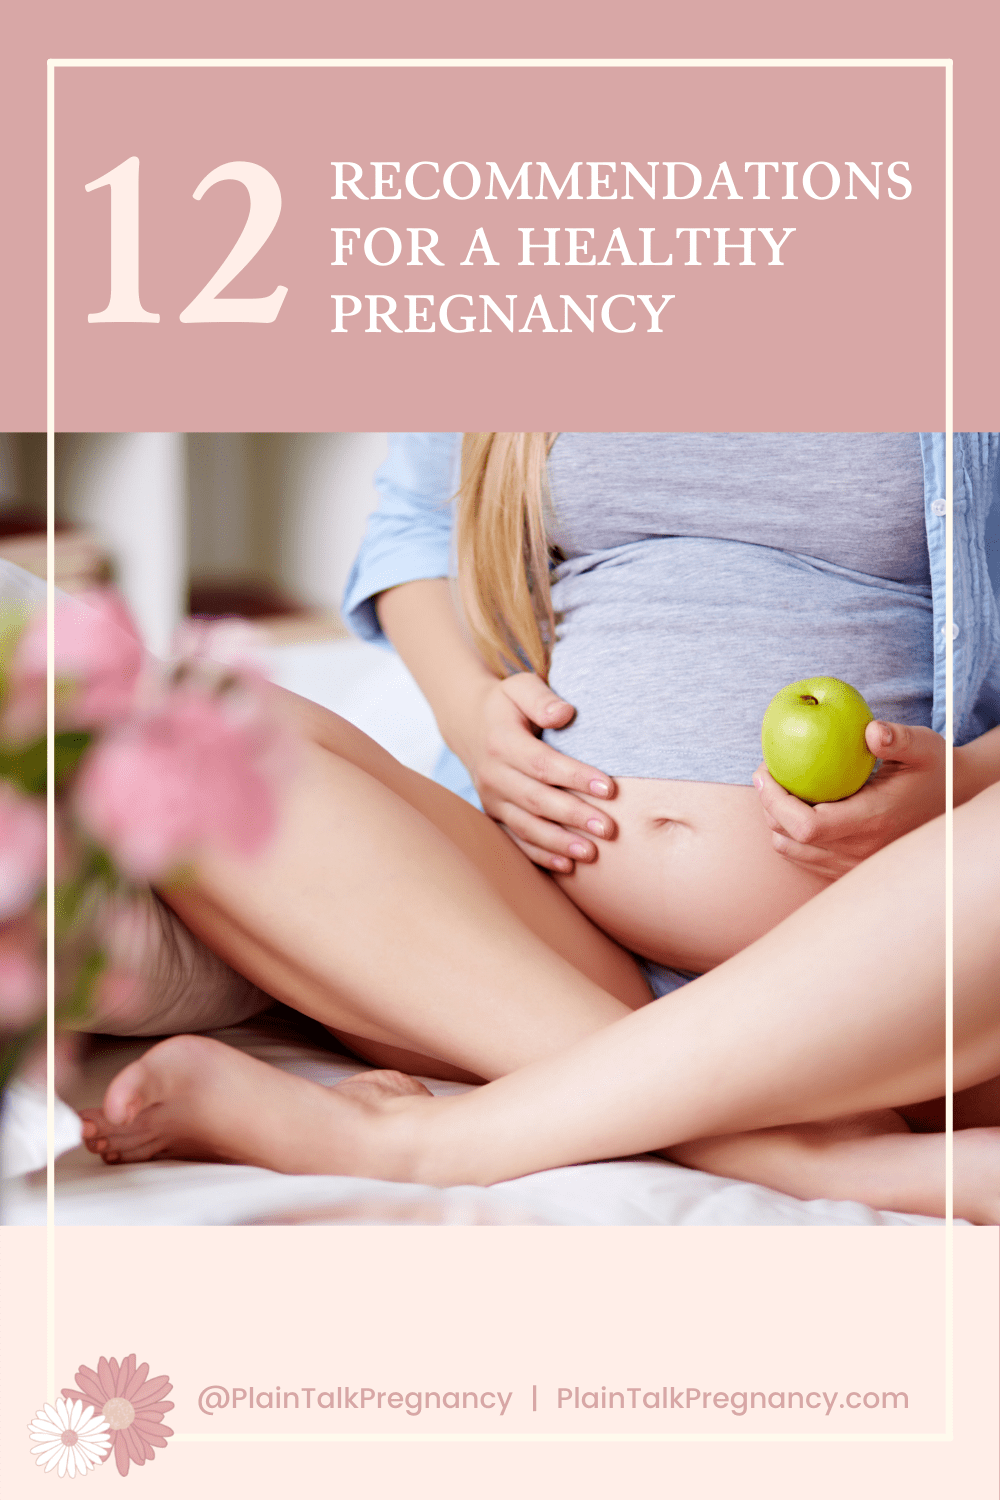 12 Recommendations for a Healthy Pregnancy - PlainTalkPregnancy.com